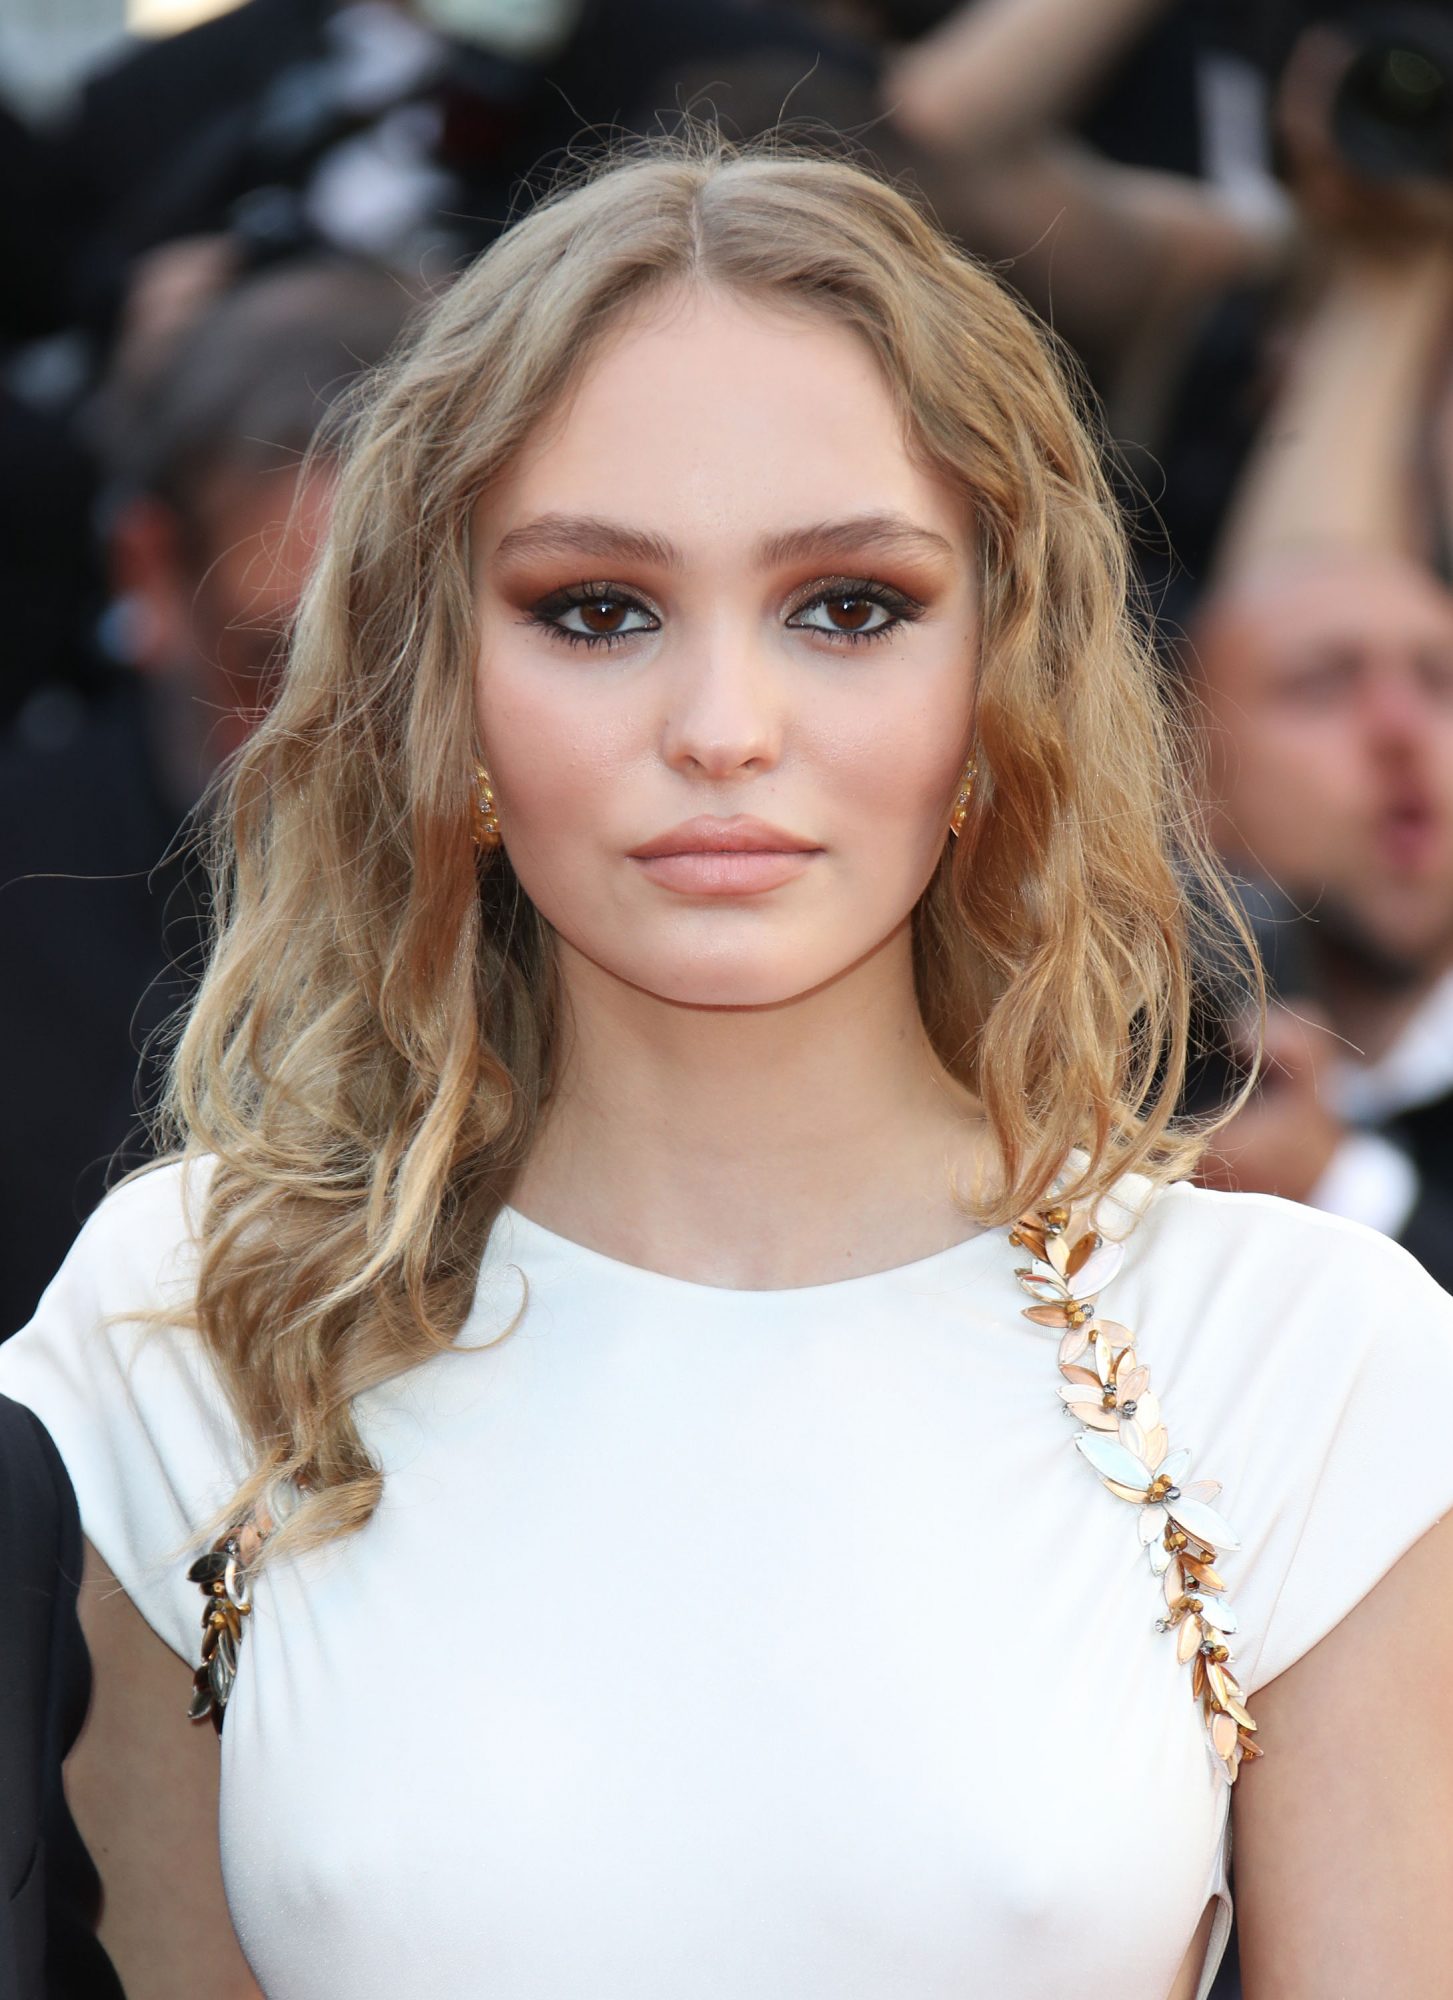 Cannes Film Festival Celebrity Hair and Makeup 2016